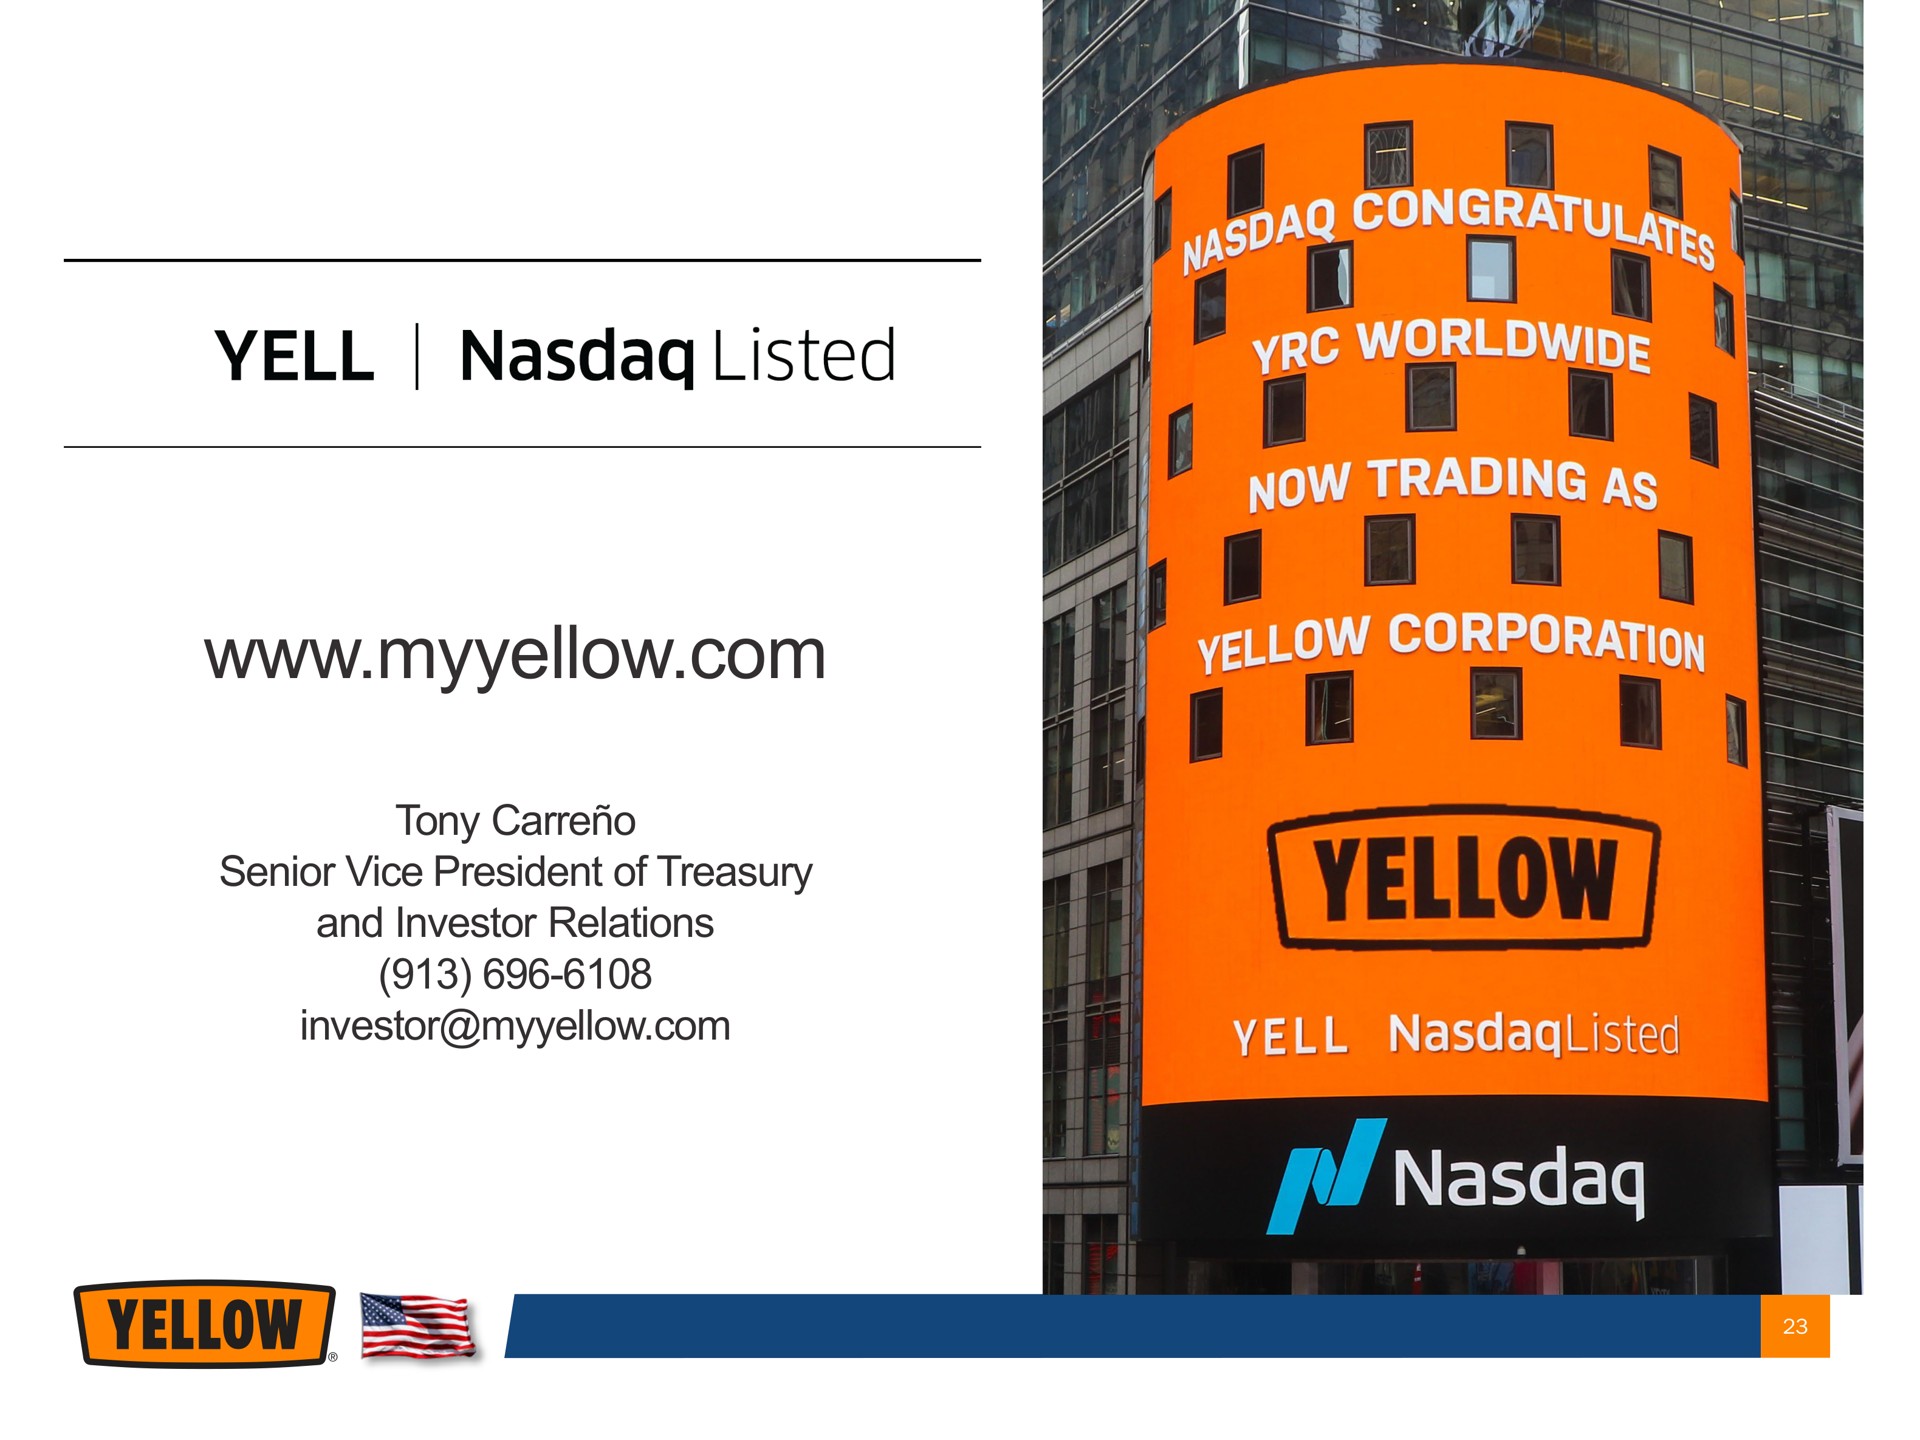 tony senior vice president of treasury and investor relations investor vell listed yellow now trading as vell | Yellow Corporation